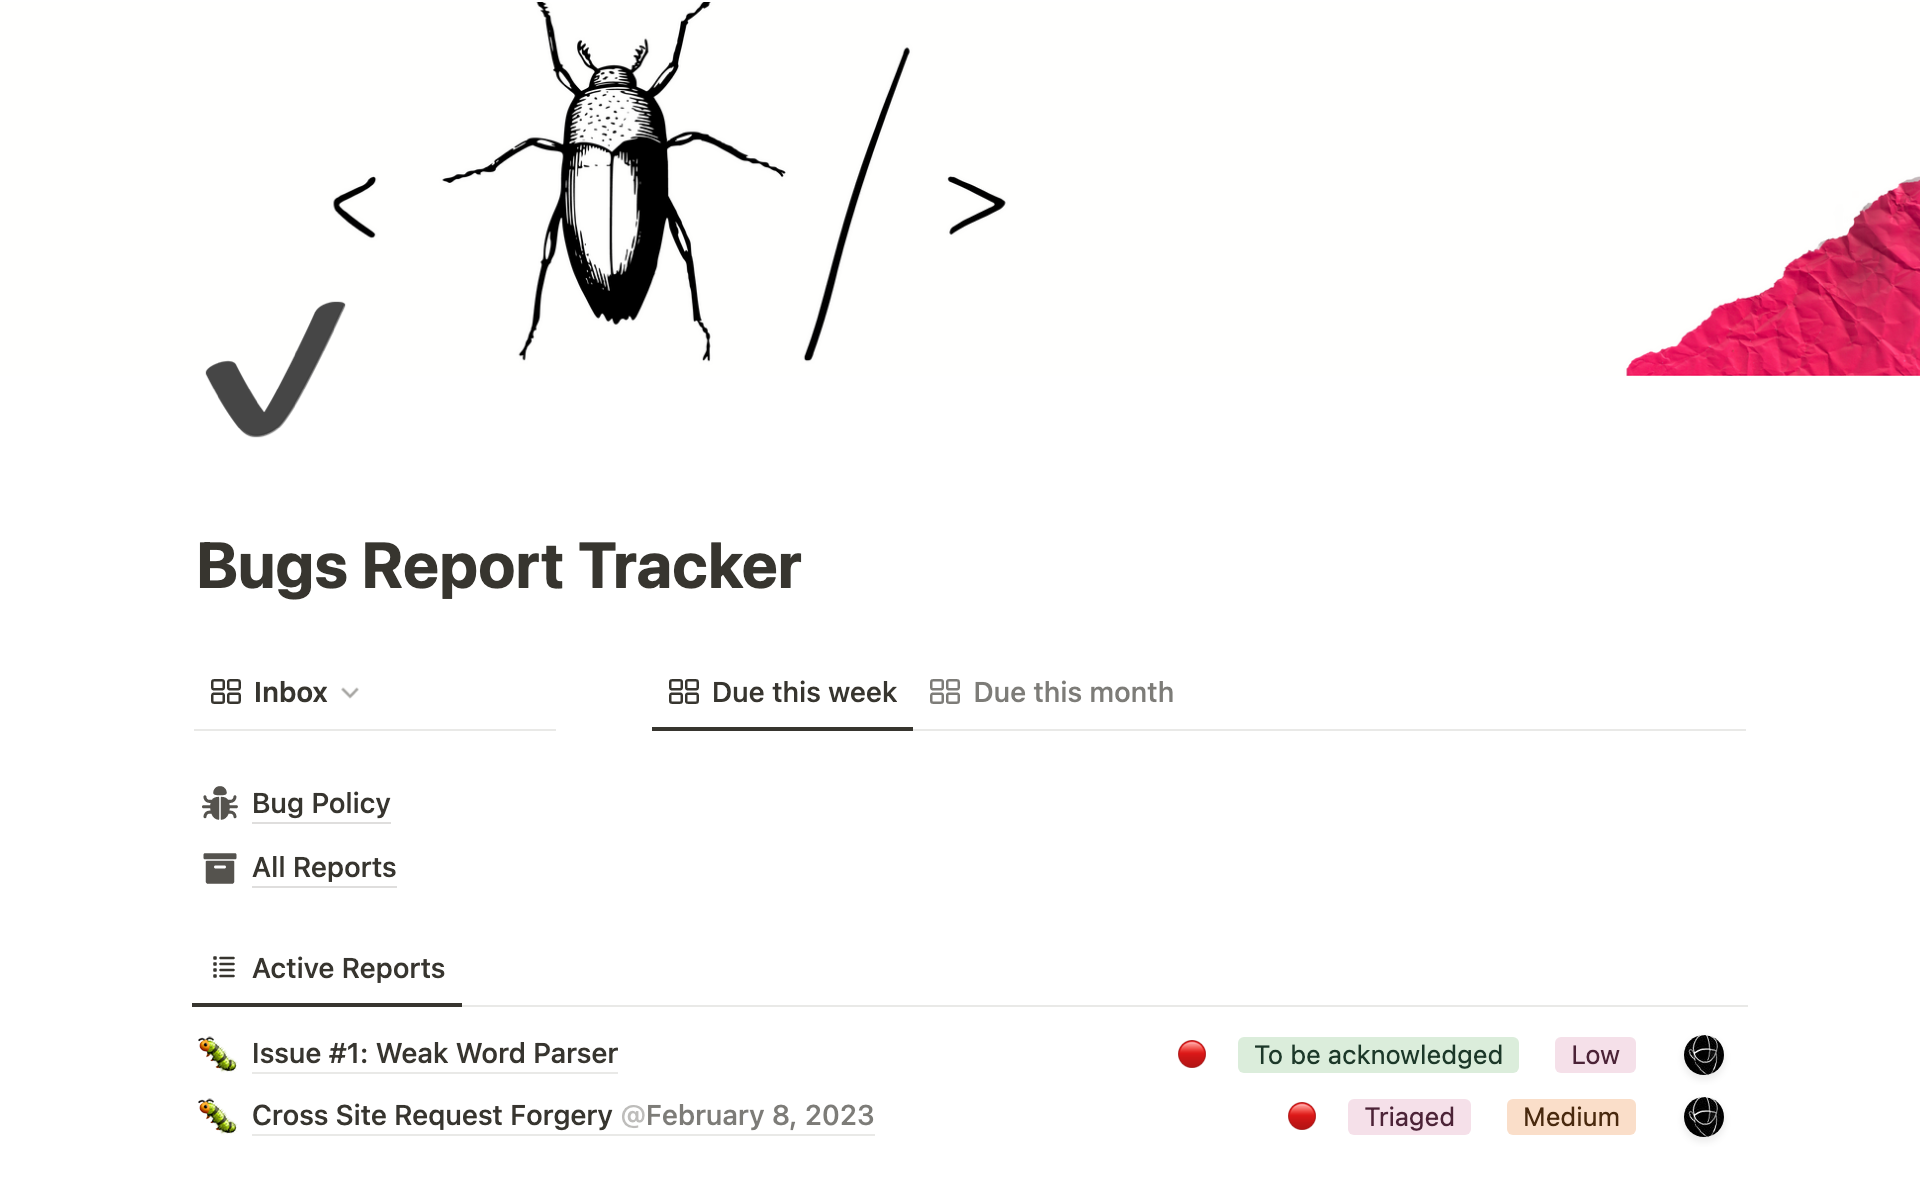 This template is intended for developers/security teams who are in search of manageable and stress-free ways to process bug reports.